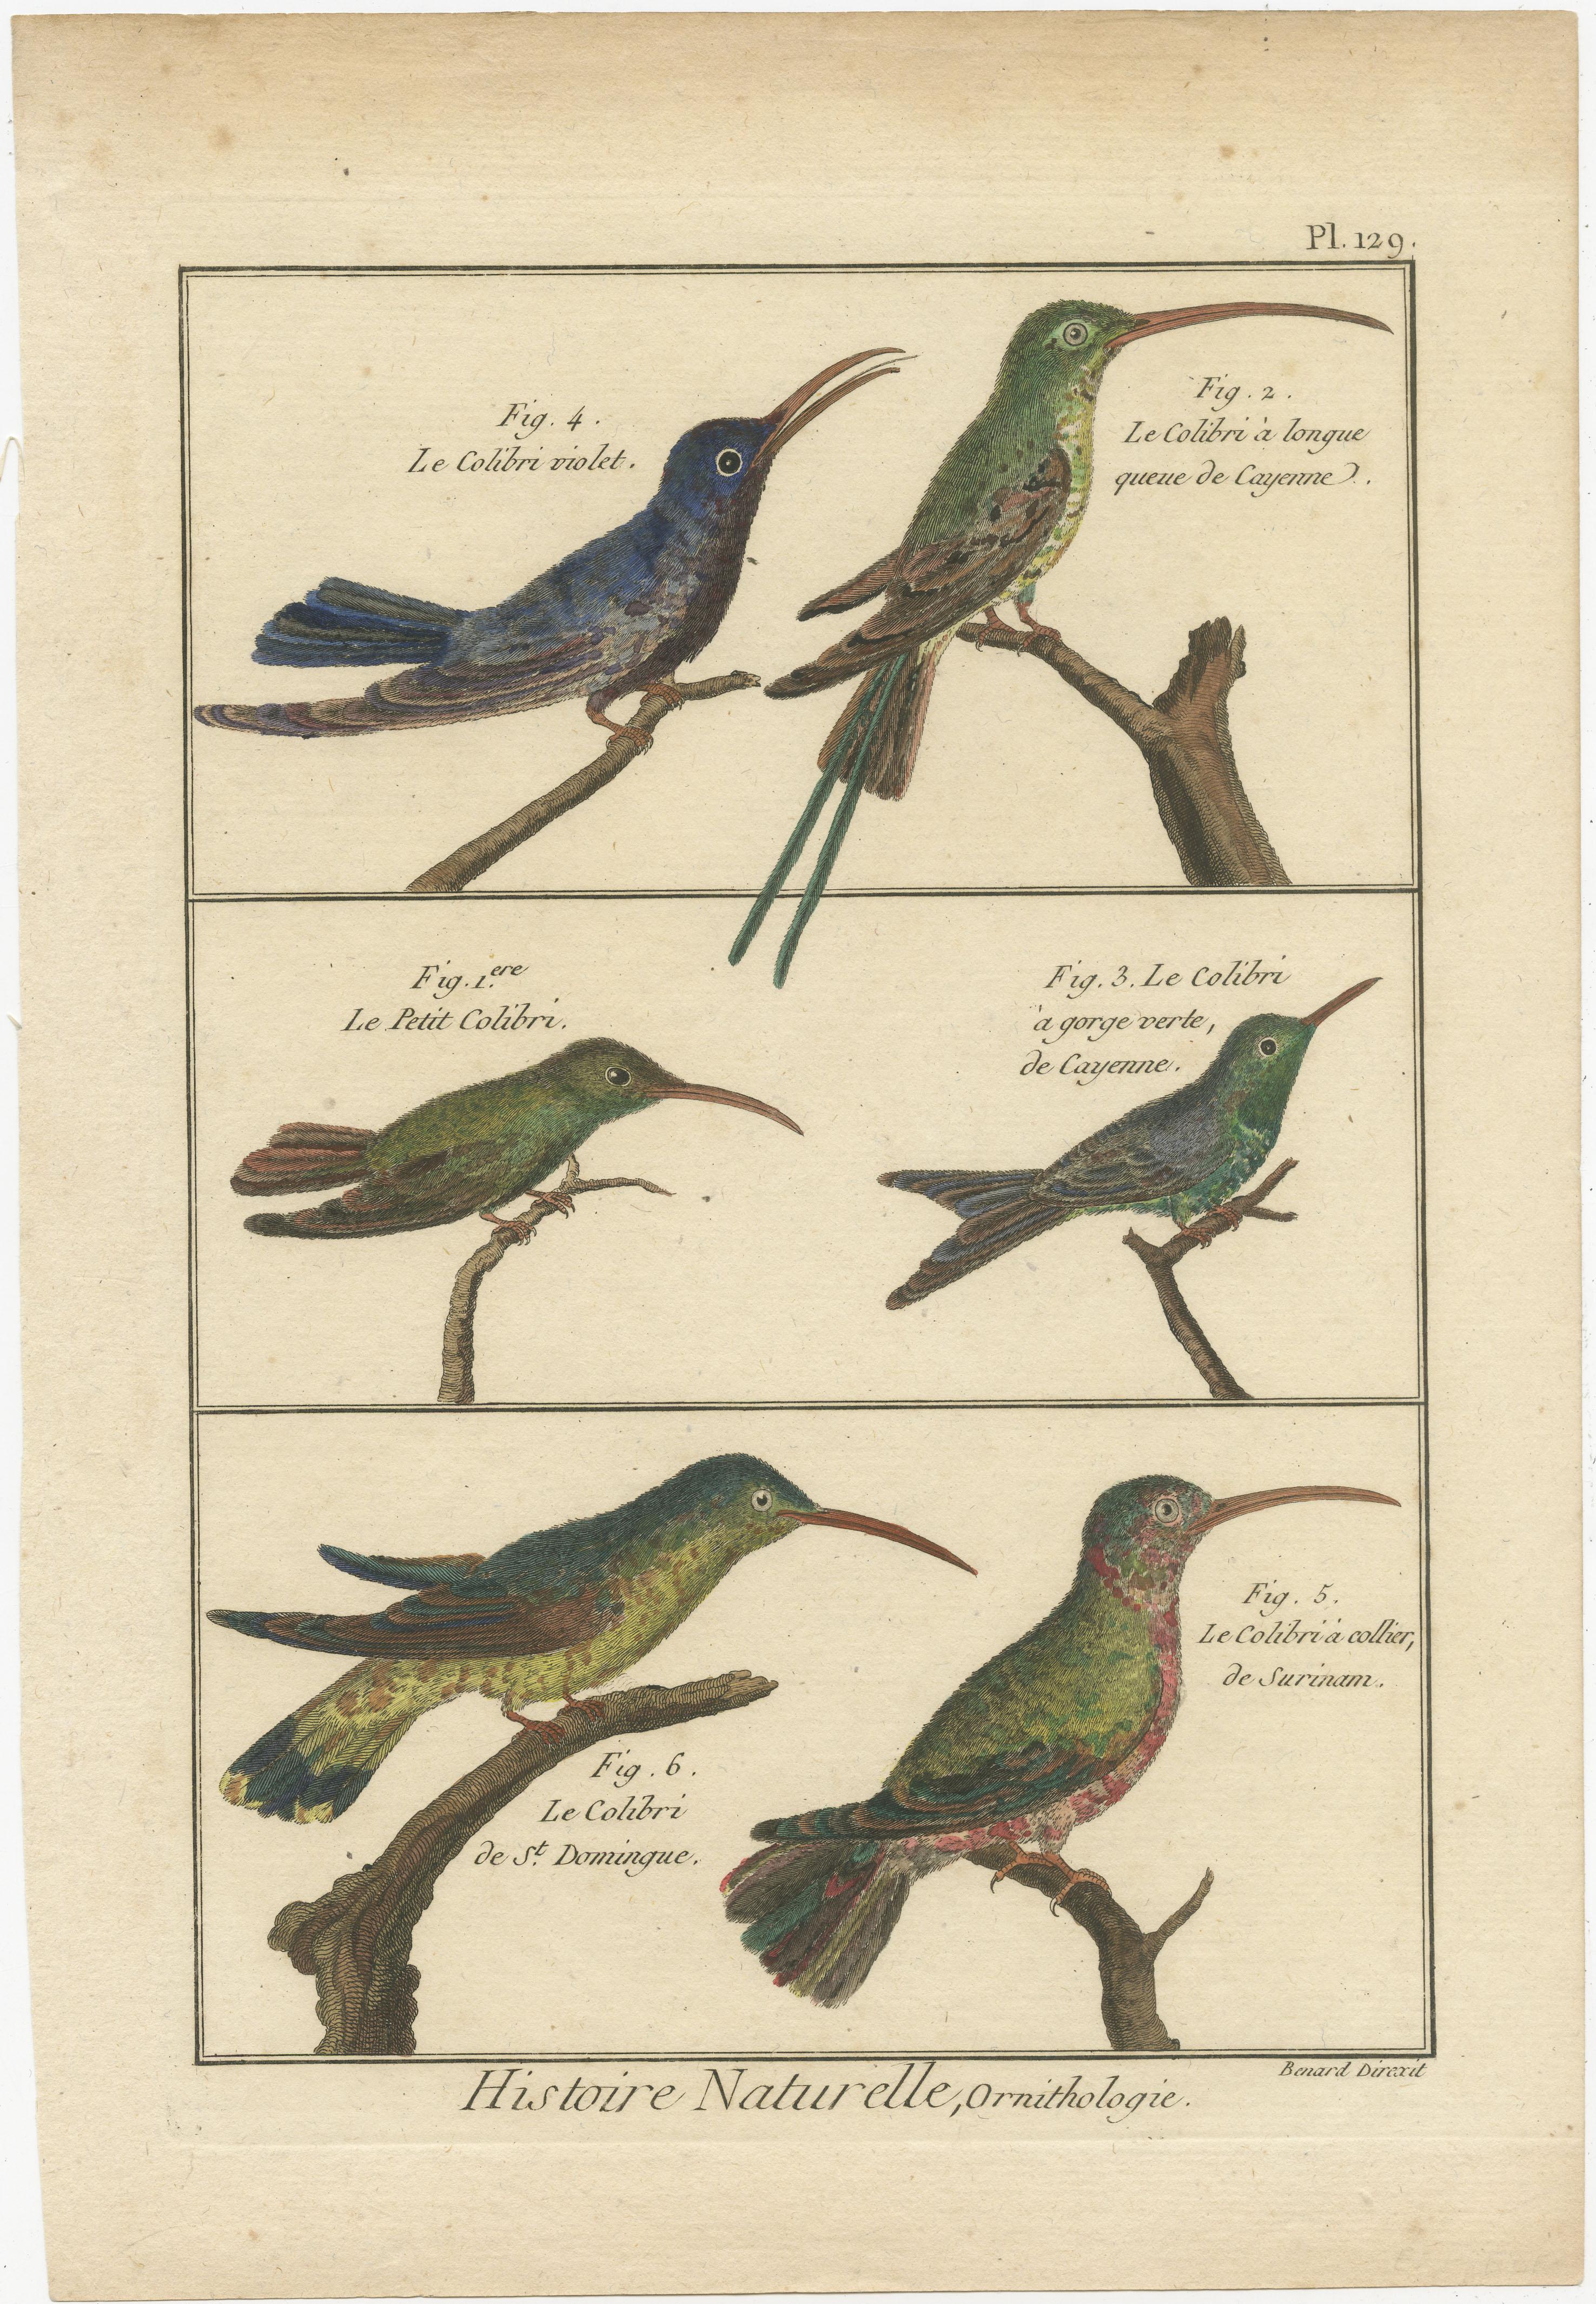 An authentic, perfect and bright, originally hand-colored, illustration of 6 Colibri's, on parchment paper (copper engraving). It has a fine shining because of the authenticly applied egg-yolk as varnish. The Artist is Robert Bernard (1792). The